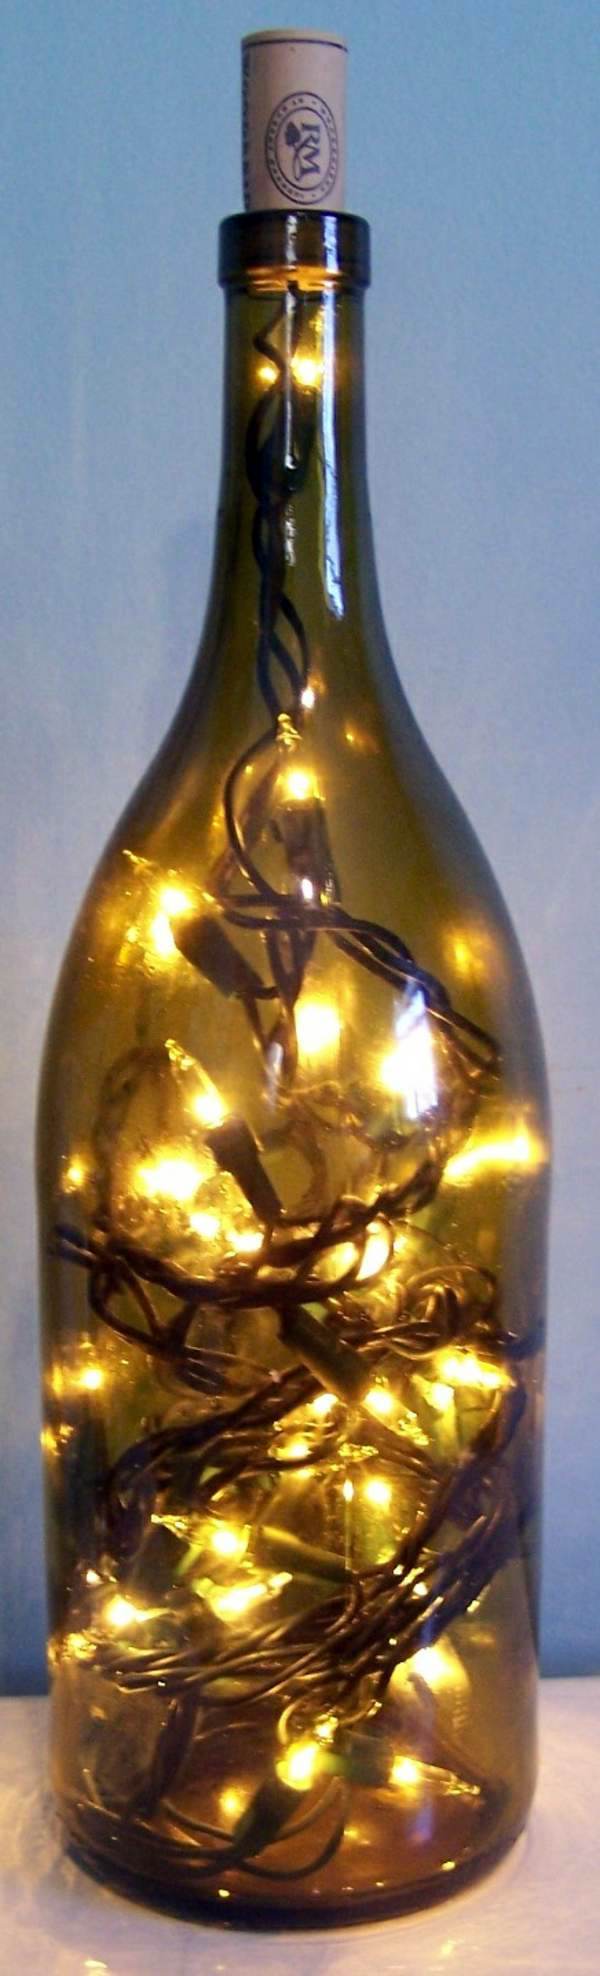 DIY Lamp from Wine Bottles – creative decorating ideas ...